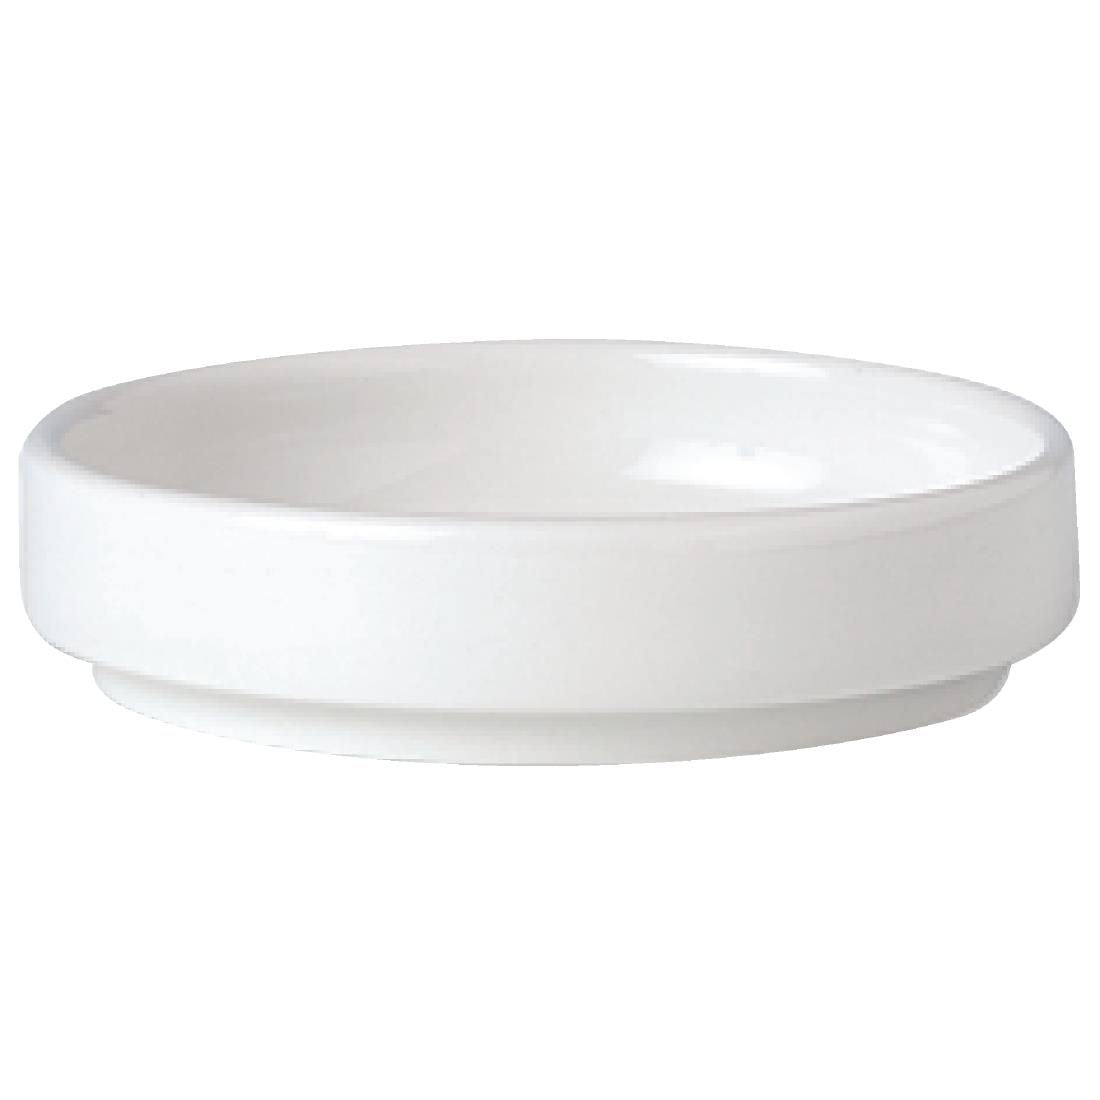 Steelite Simplicity White Stacking Ashtrays 102mm (Pack of 12)